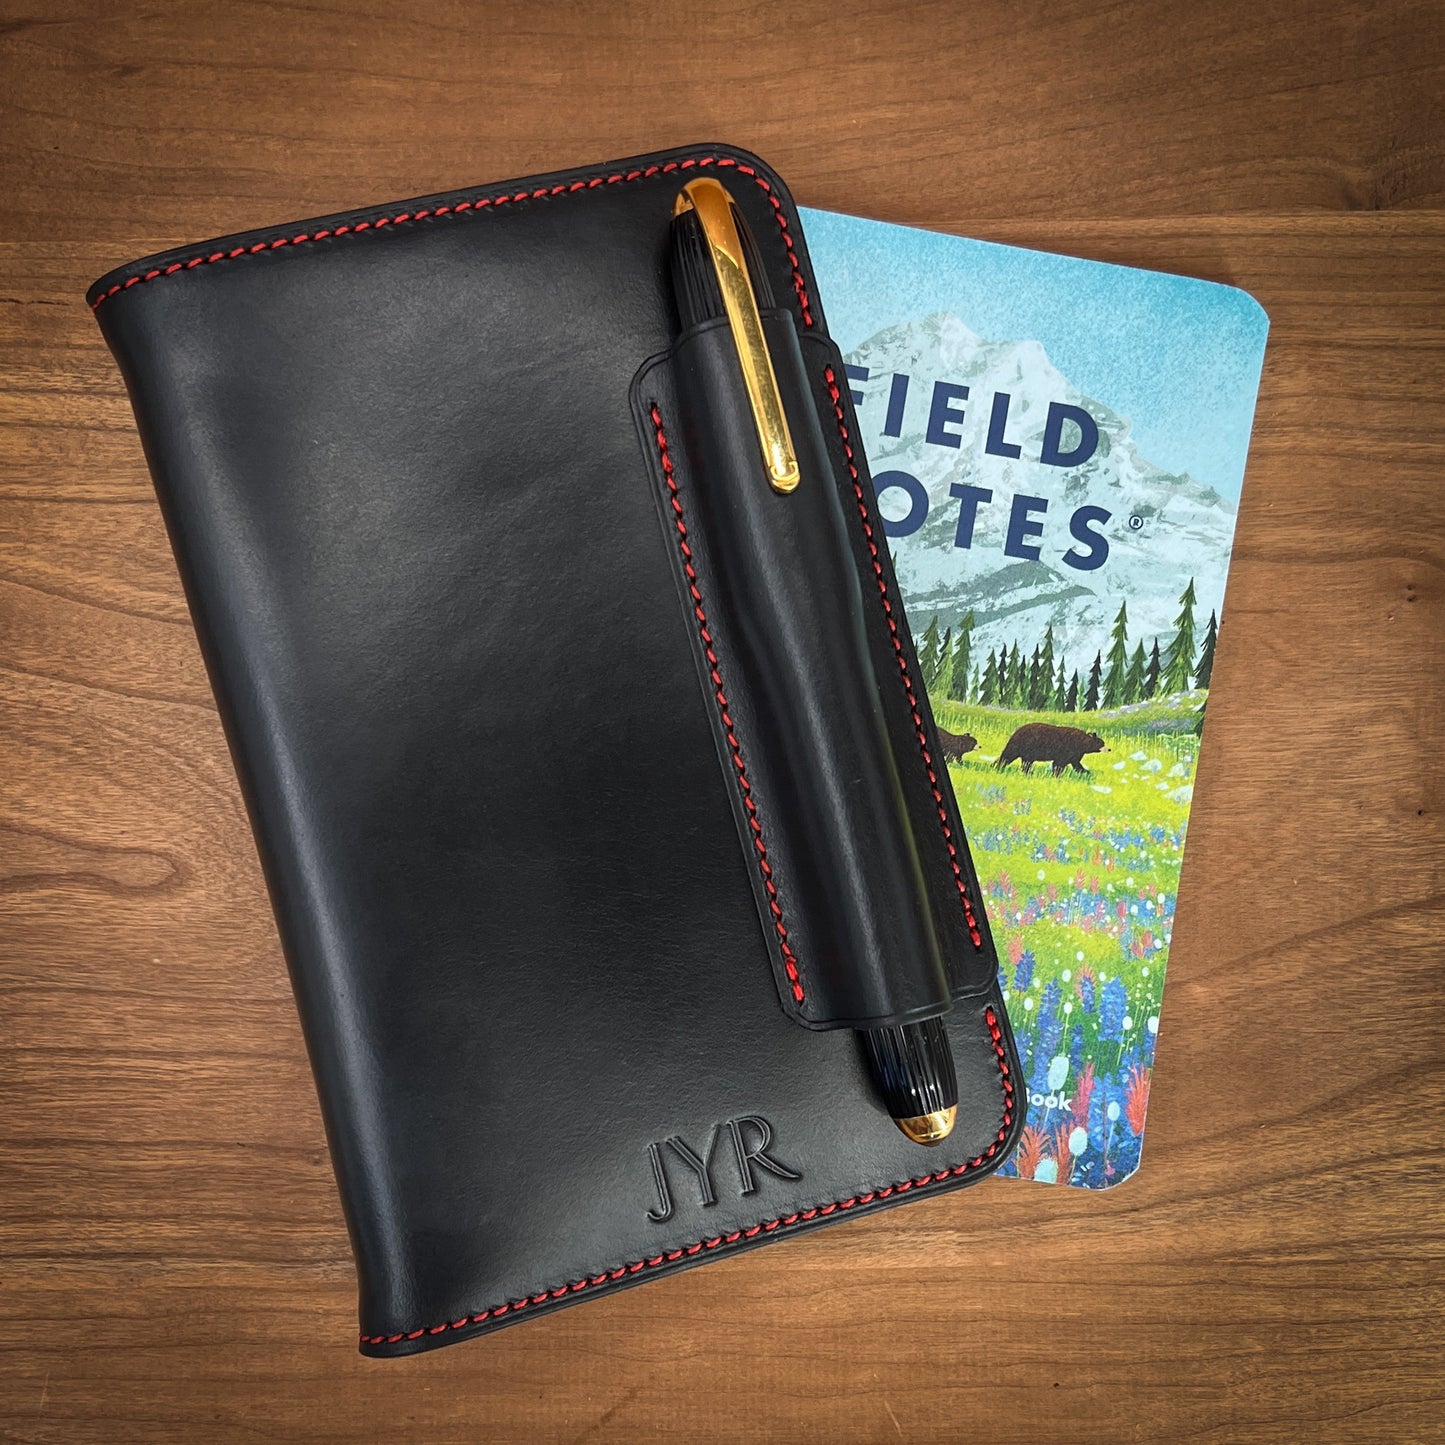 Handmade Field Notes Cover in Black CXL Horween Leather with Red Stitching and Cartier Pen